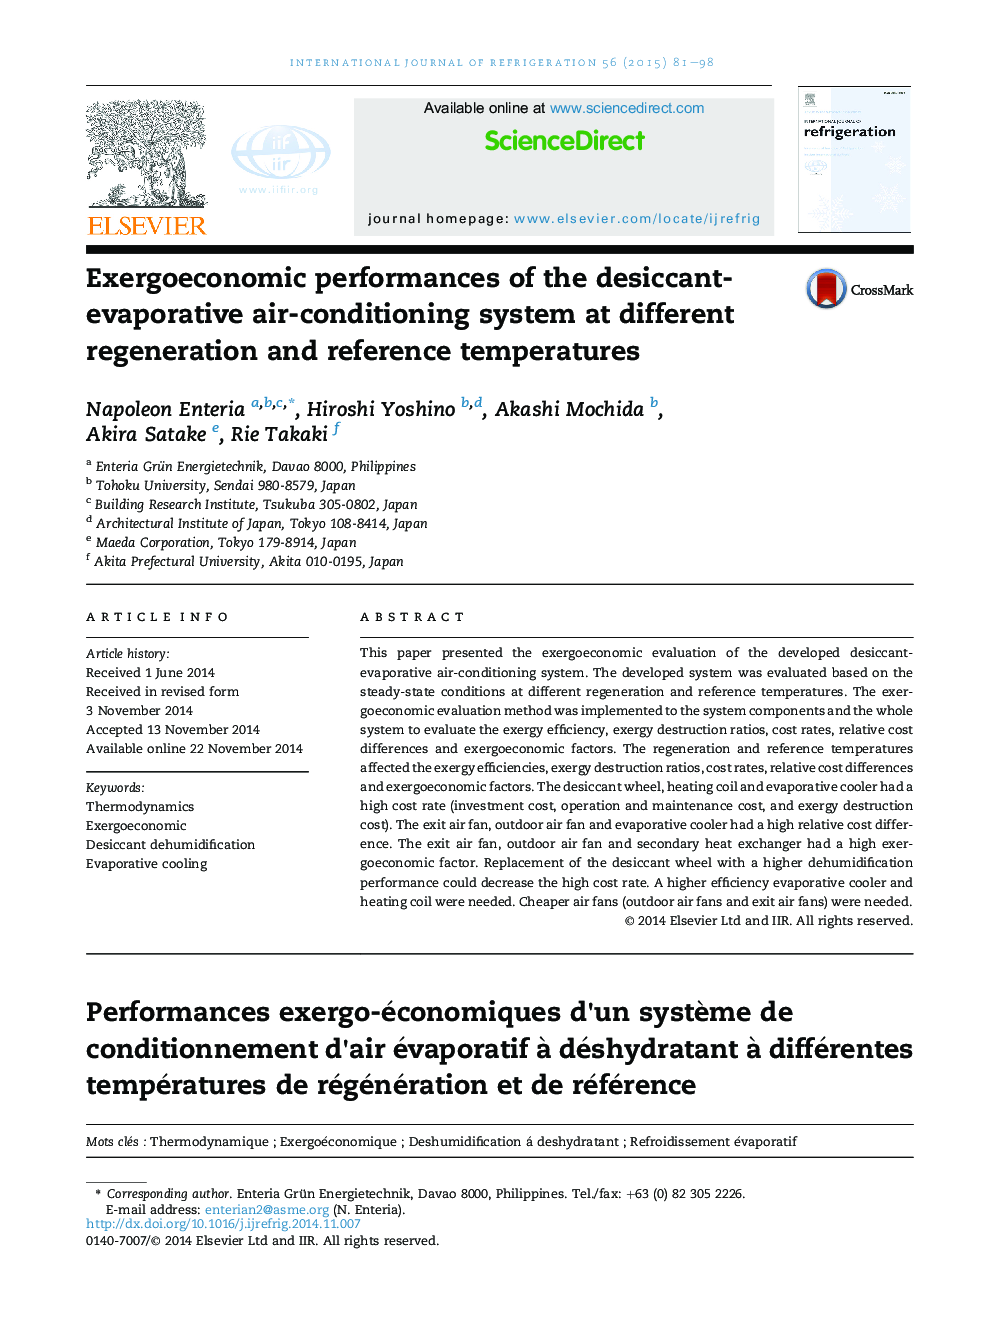 Exergoeconomic performances of the desiccant-evaporative air-conditioning system at different regeneration and reference temperatures